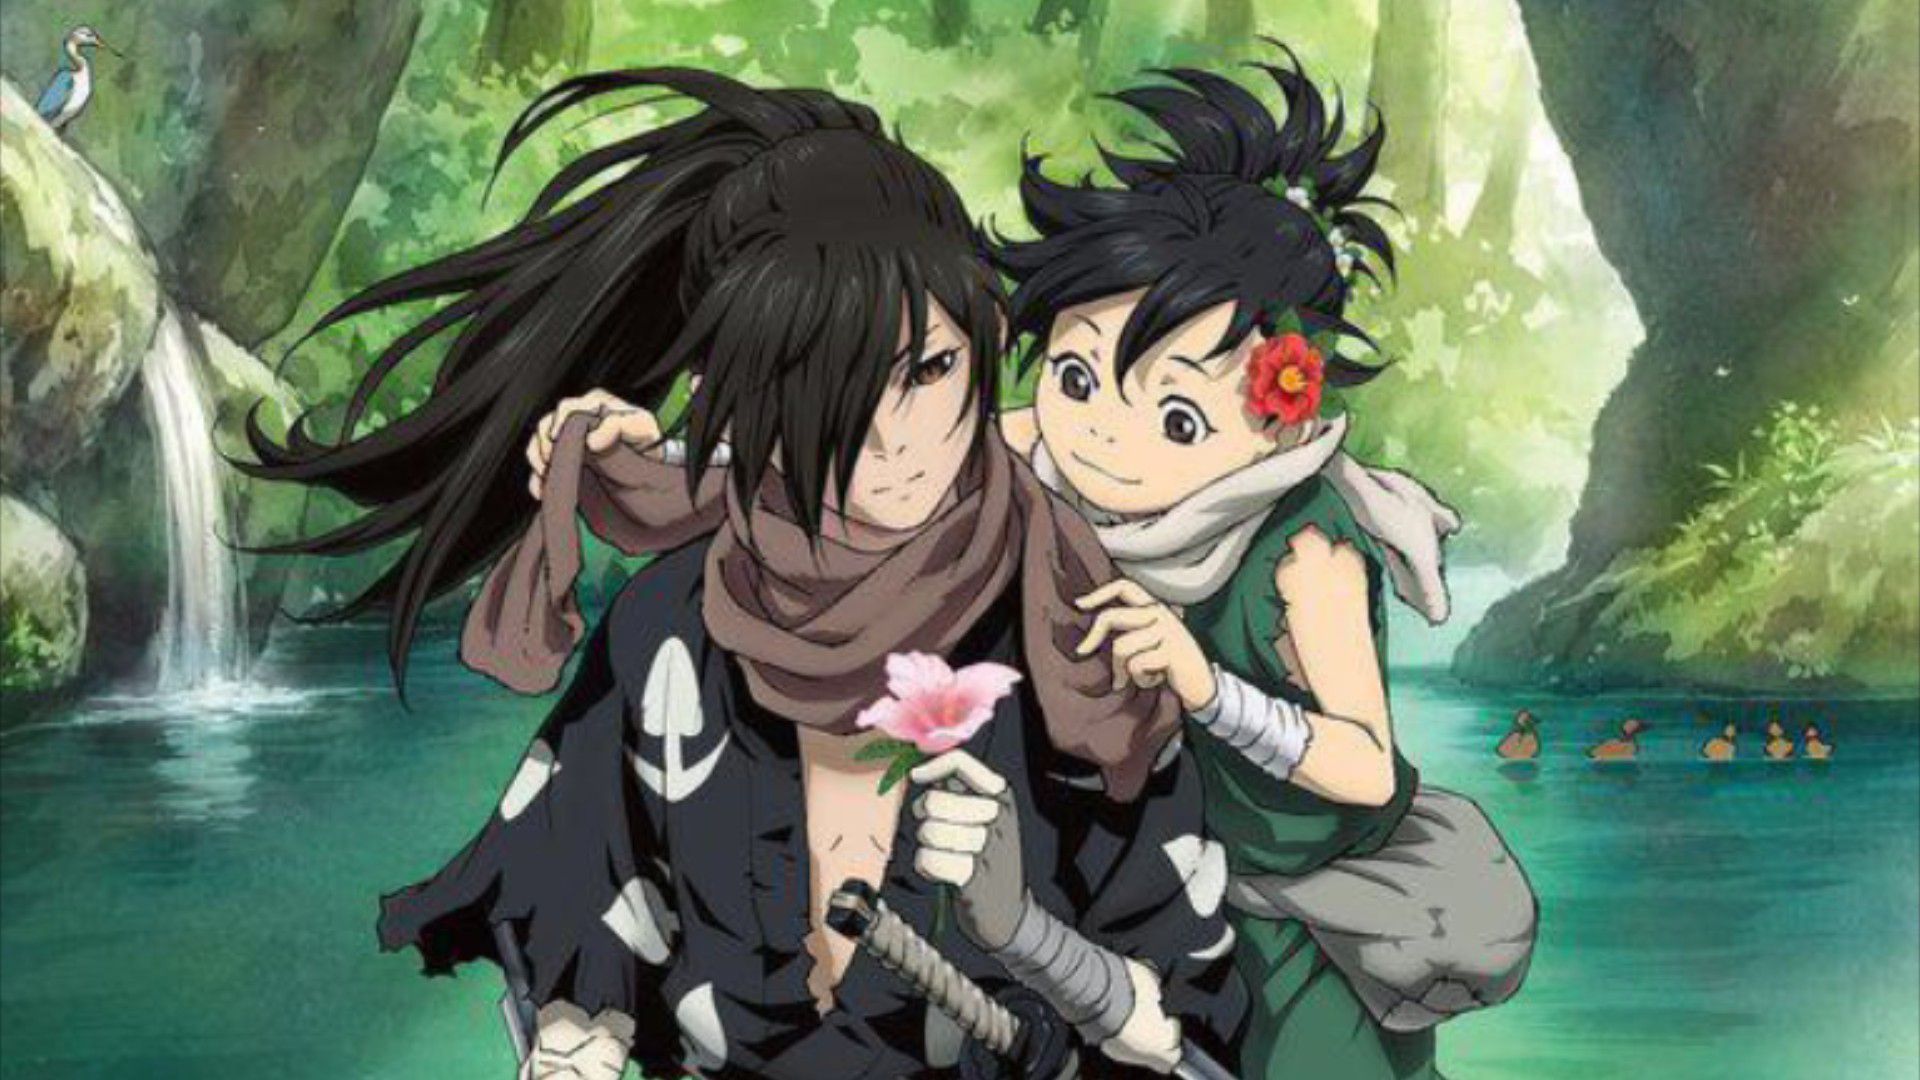 Is Dororo Dubbed in English Available? Where to Watch Dororo Online?